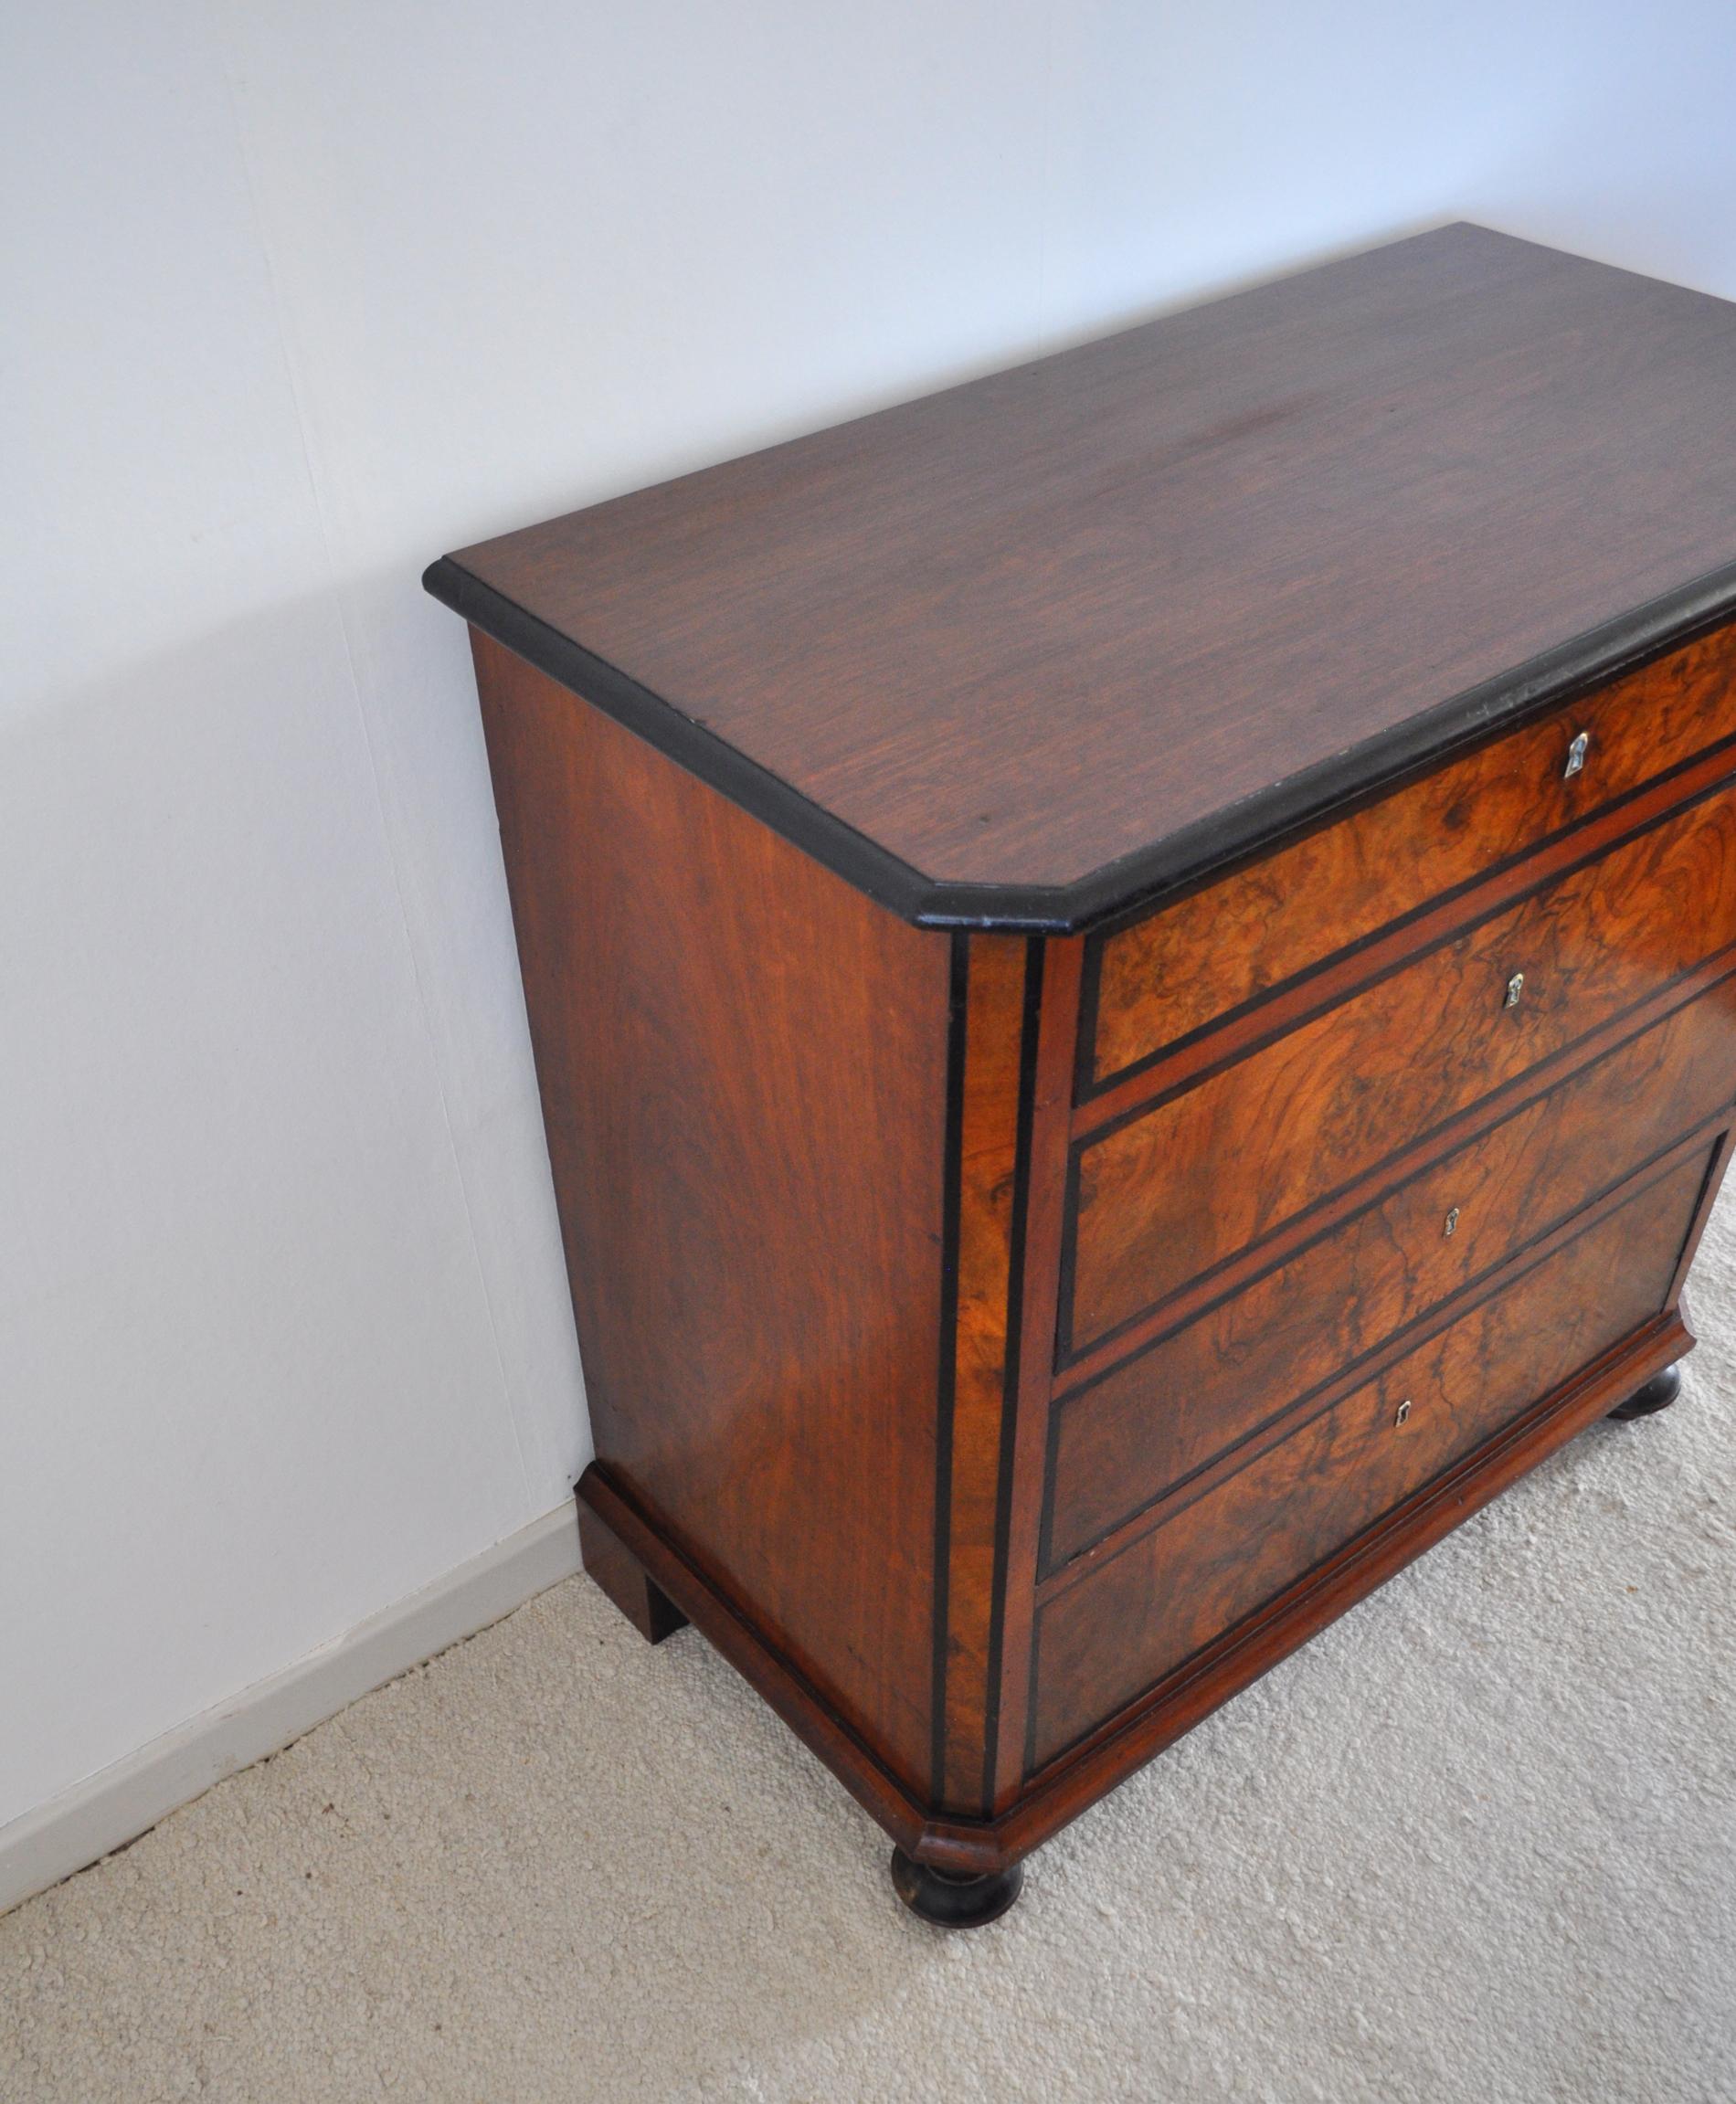 Antique Scandinavian Chest of Drawers in Walnut & Mahogany with Ebonized Details For Sale 2